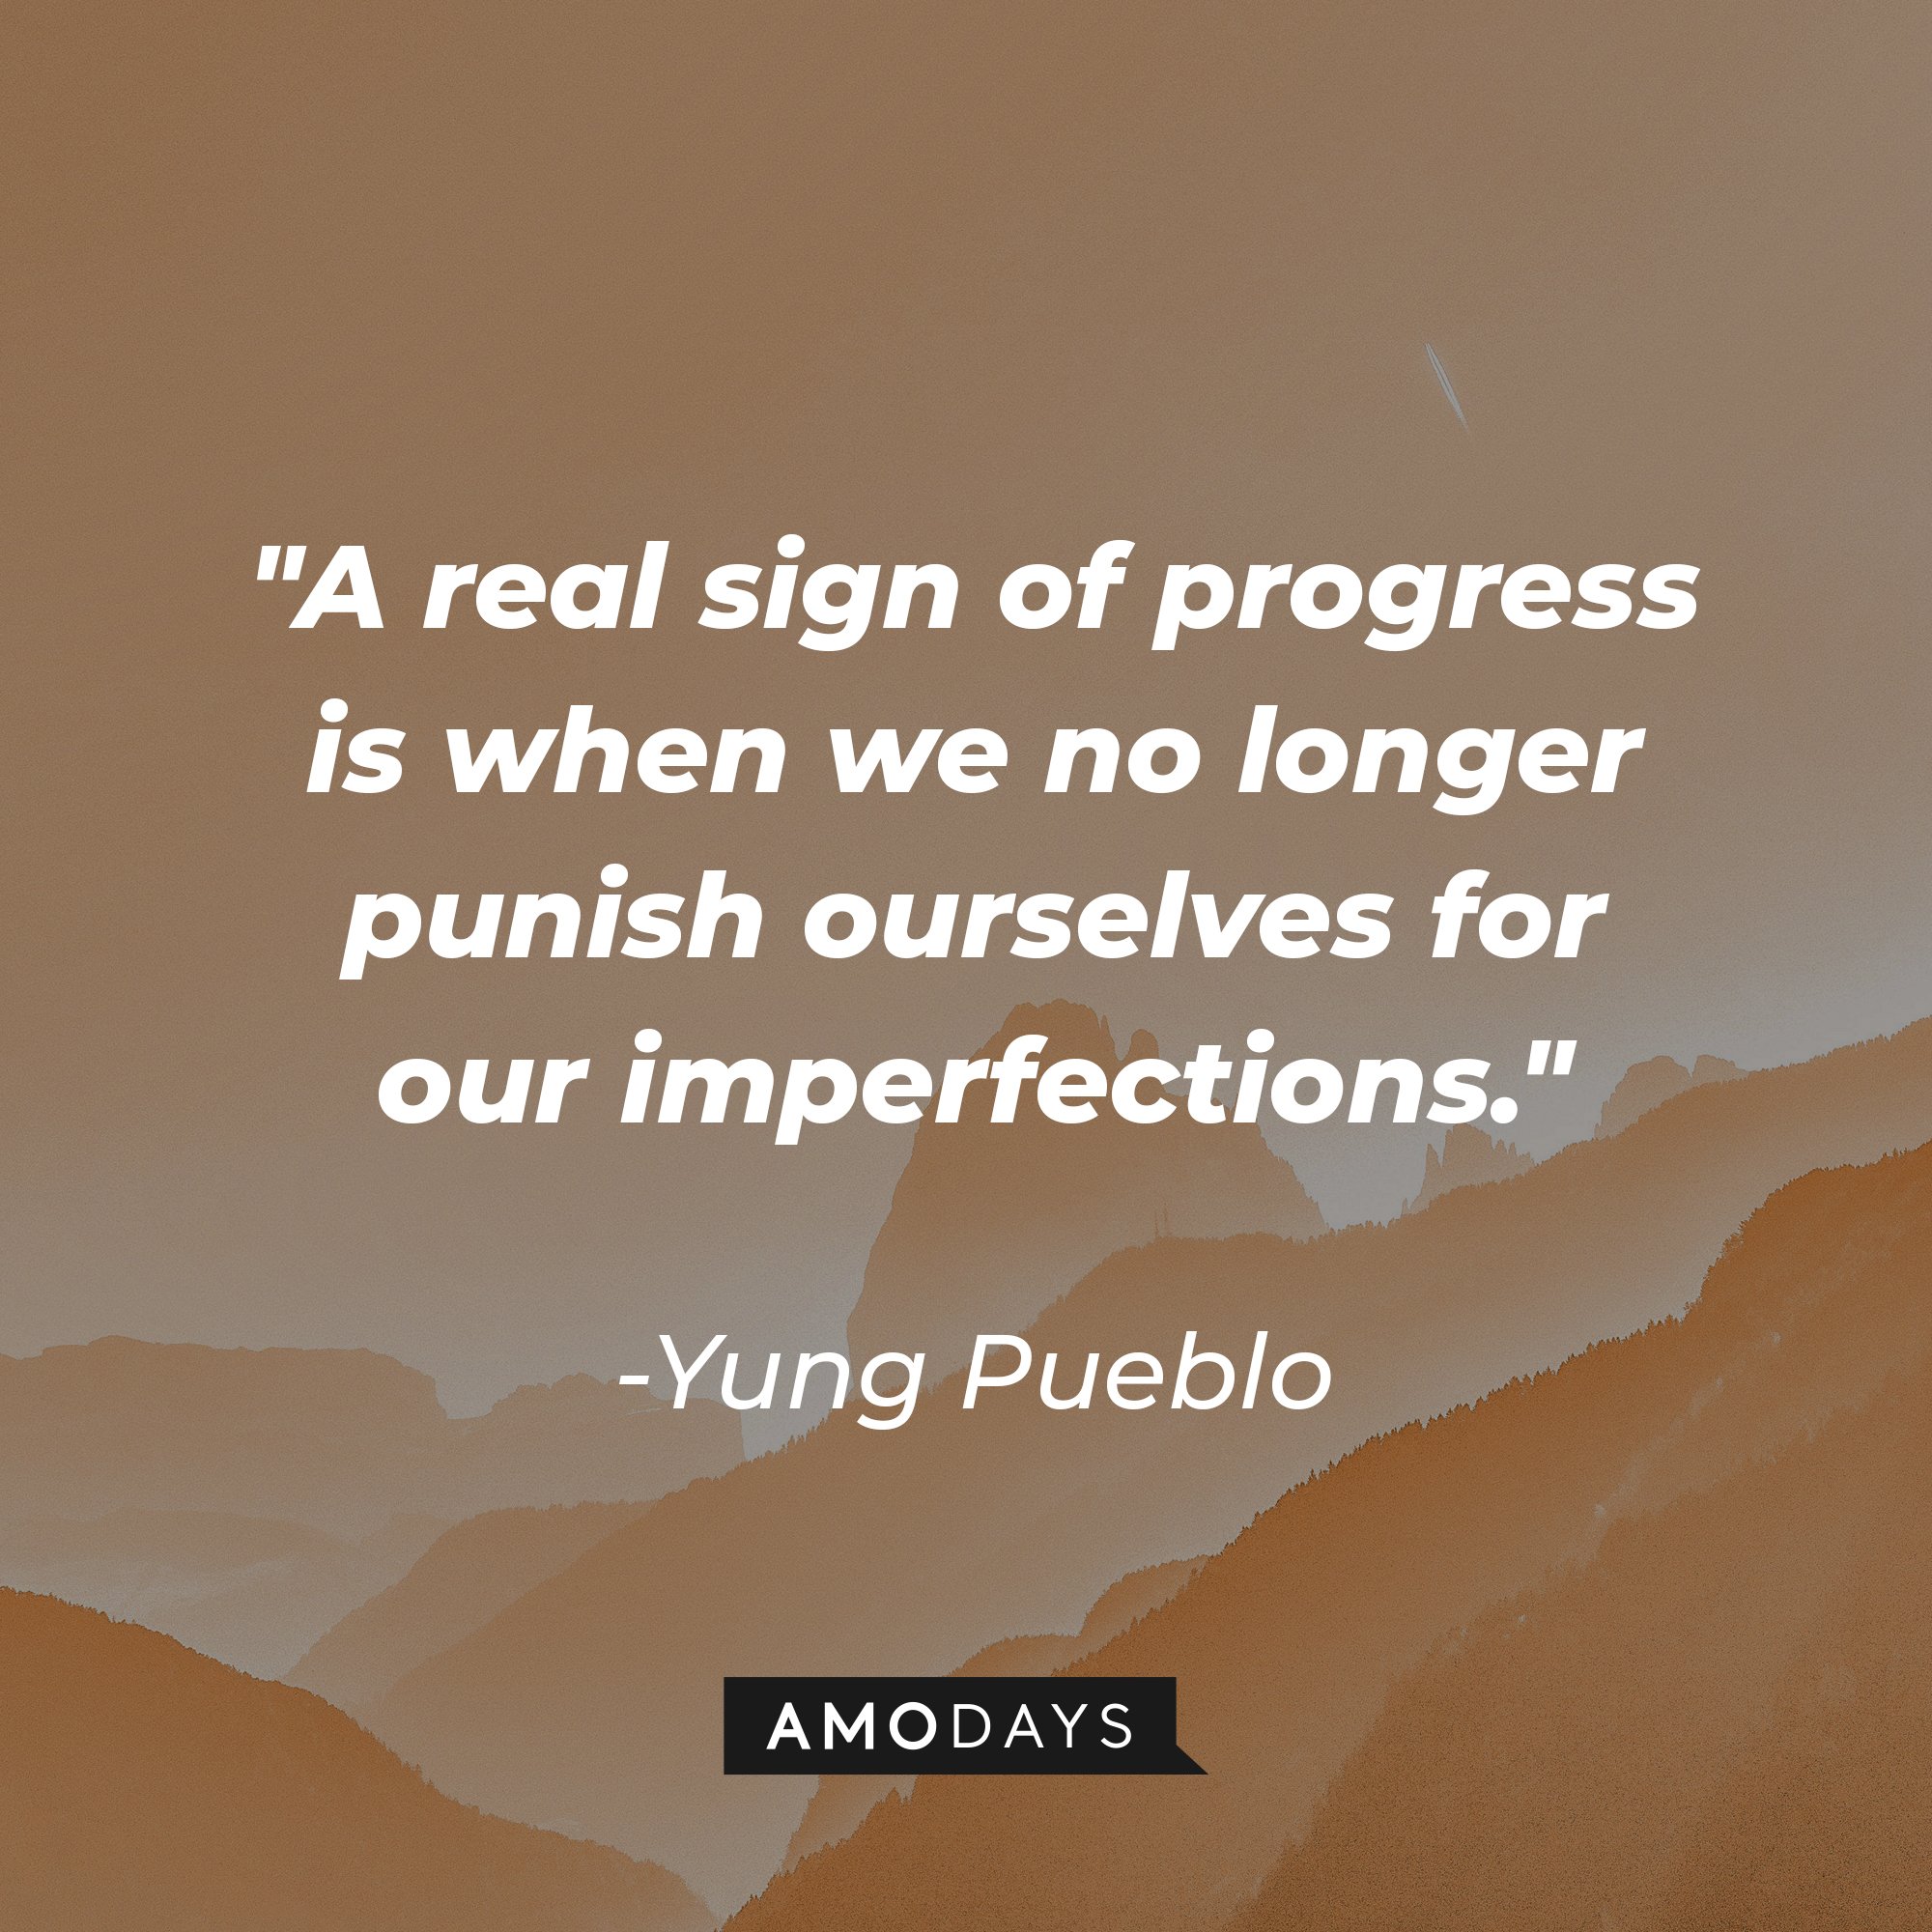 Yung Pueblo's quote "A real sign of progress is when we no longer punish ourselves for our imperfections." | Source: Unsplash.com